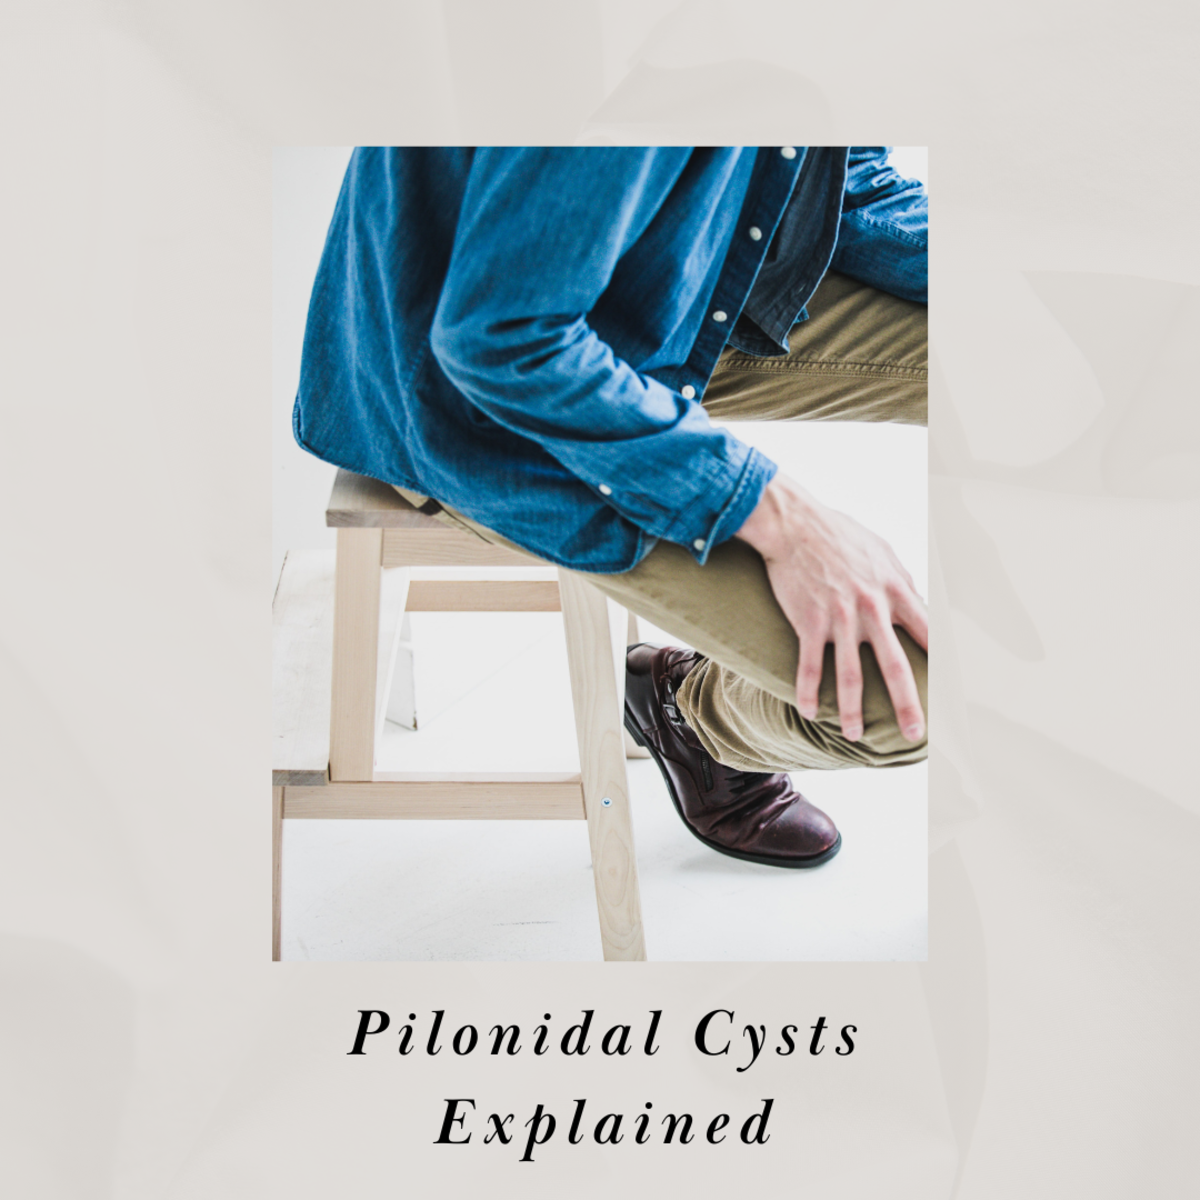 Pilonidal cysts appear most commonly on the tailbone area at the top or near the top of the cleft of the buttocks. Most doctors believe that it is caused by an ingrown hair that then becomes infected.